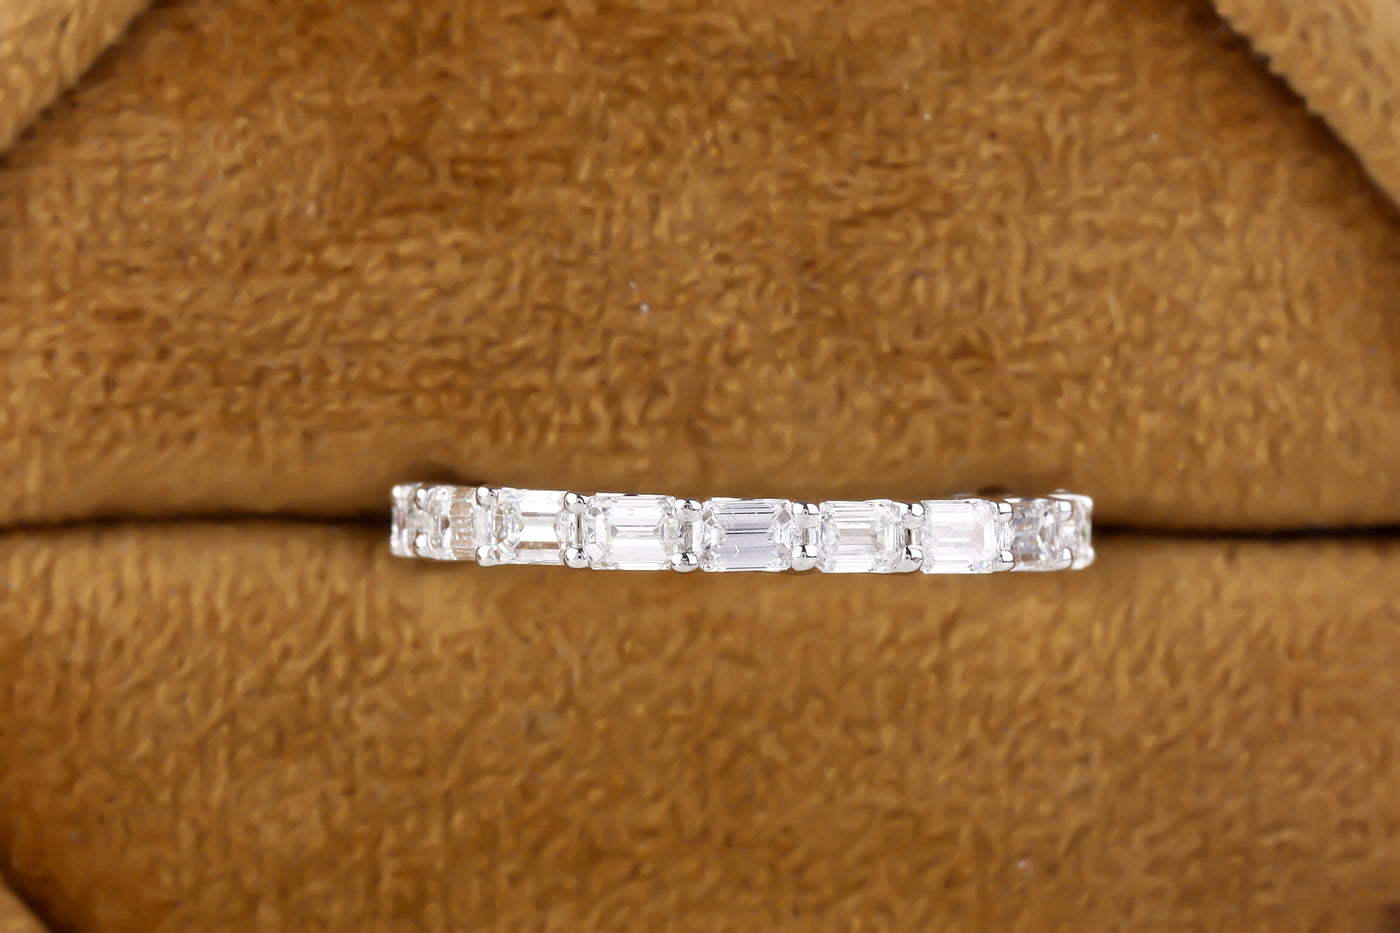 Moissanite Wedding Band, Emerald Cut Colorless Moissanite Band, 14K White Gold Band, Full Eternity Band, Matching Band For Engagement Ring